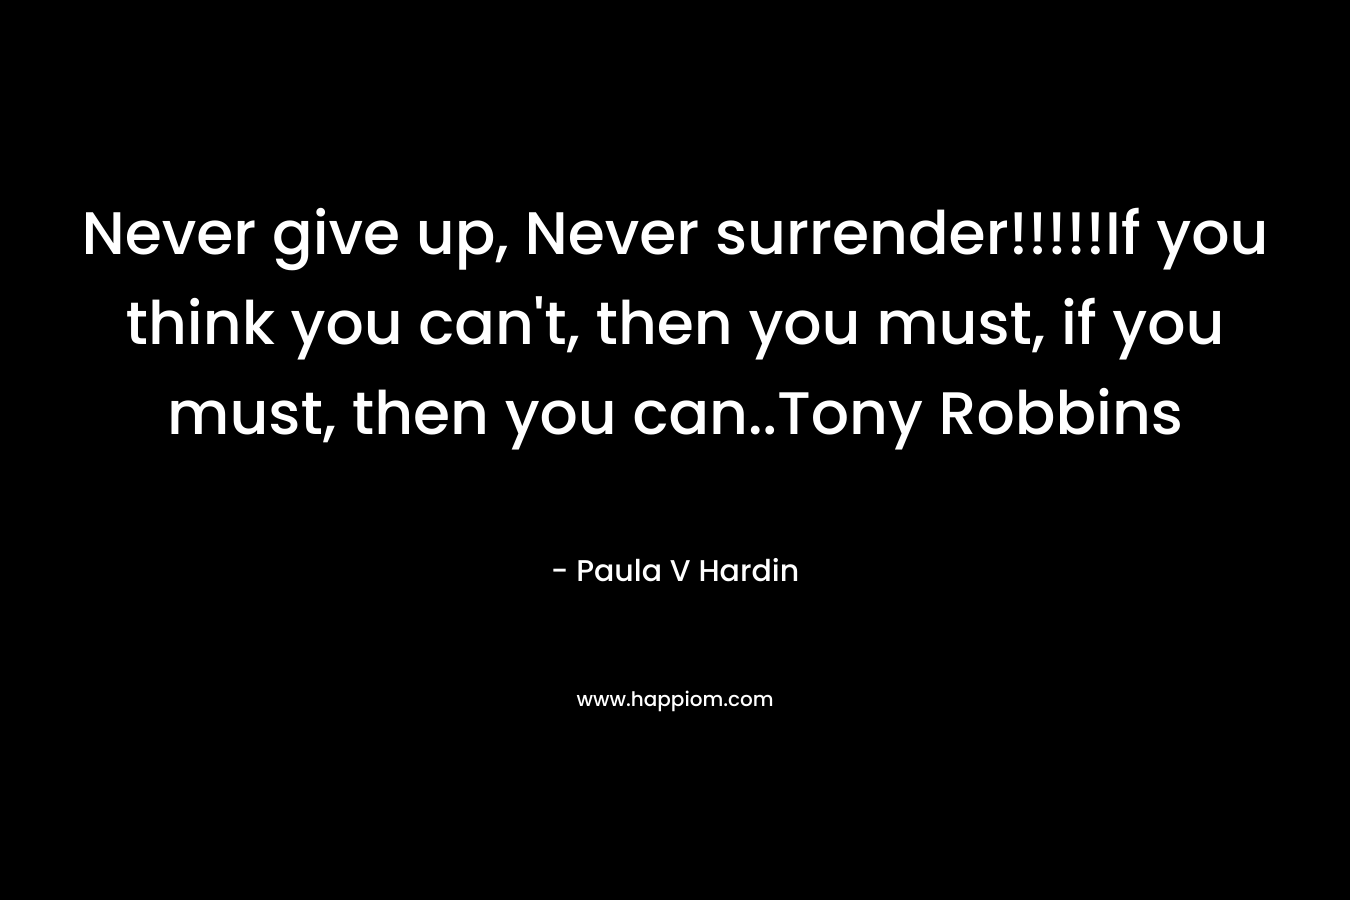 Never give up, Never surrender!!!!!If you think you can't, then you must, if you must, then you can..Tony Robbins